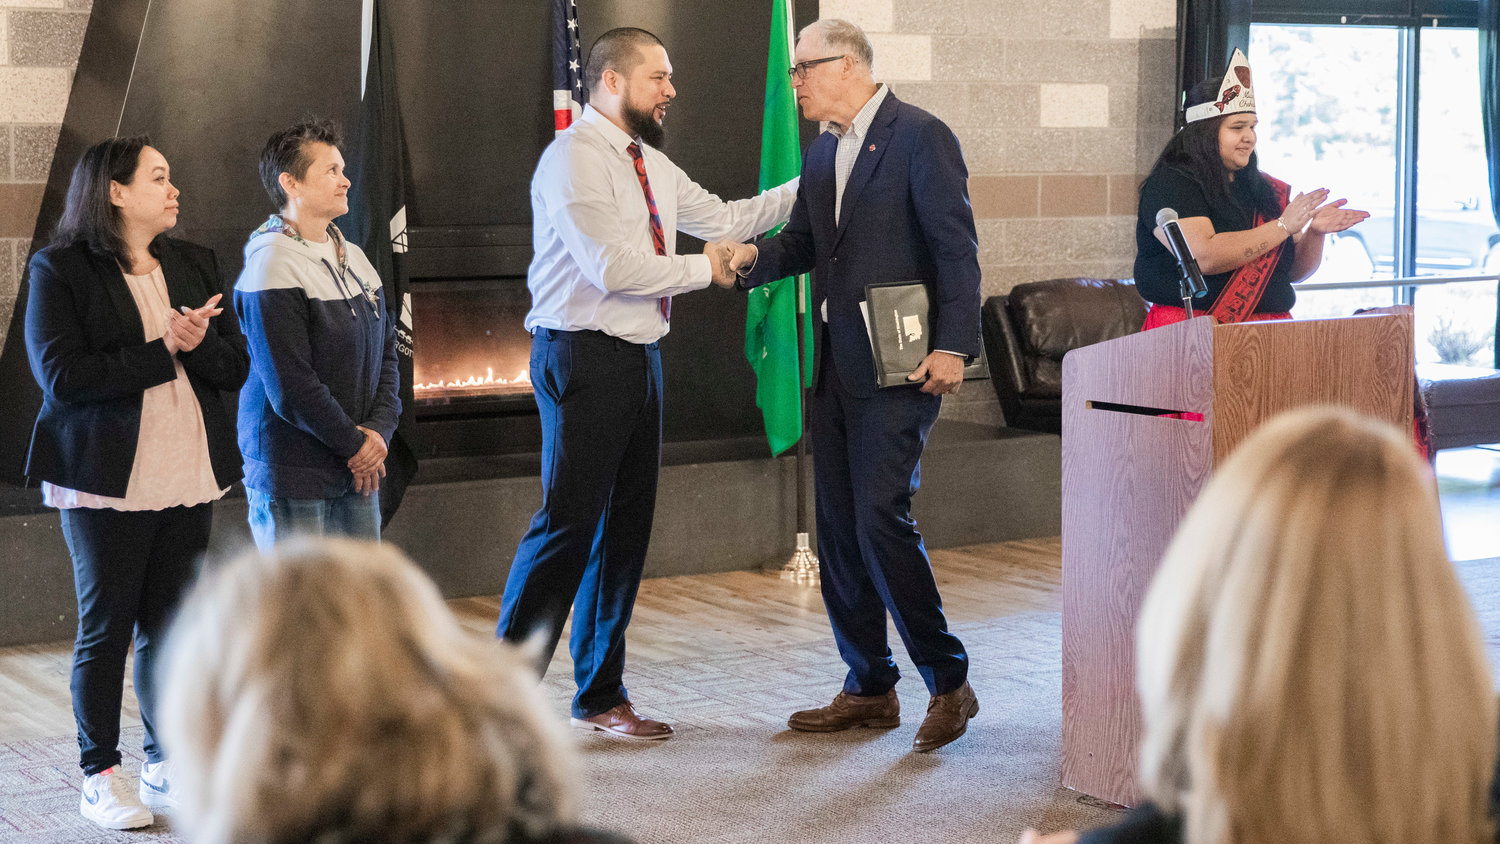 Chehalis Tribe Chairman Dustin Klatush shakes hands with Gov. Jay Inslee during a meeting discussing hydrogen power in Washington state Wednesday morning near Oakville.